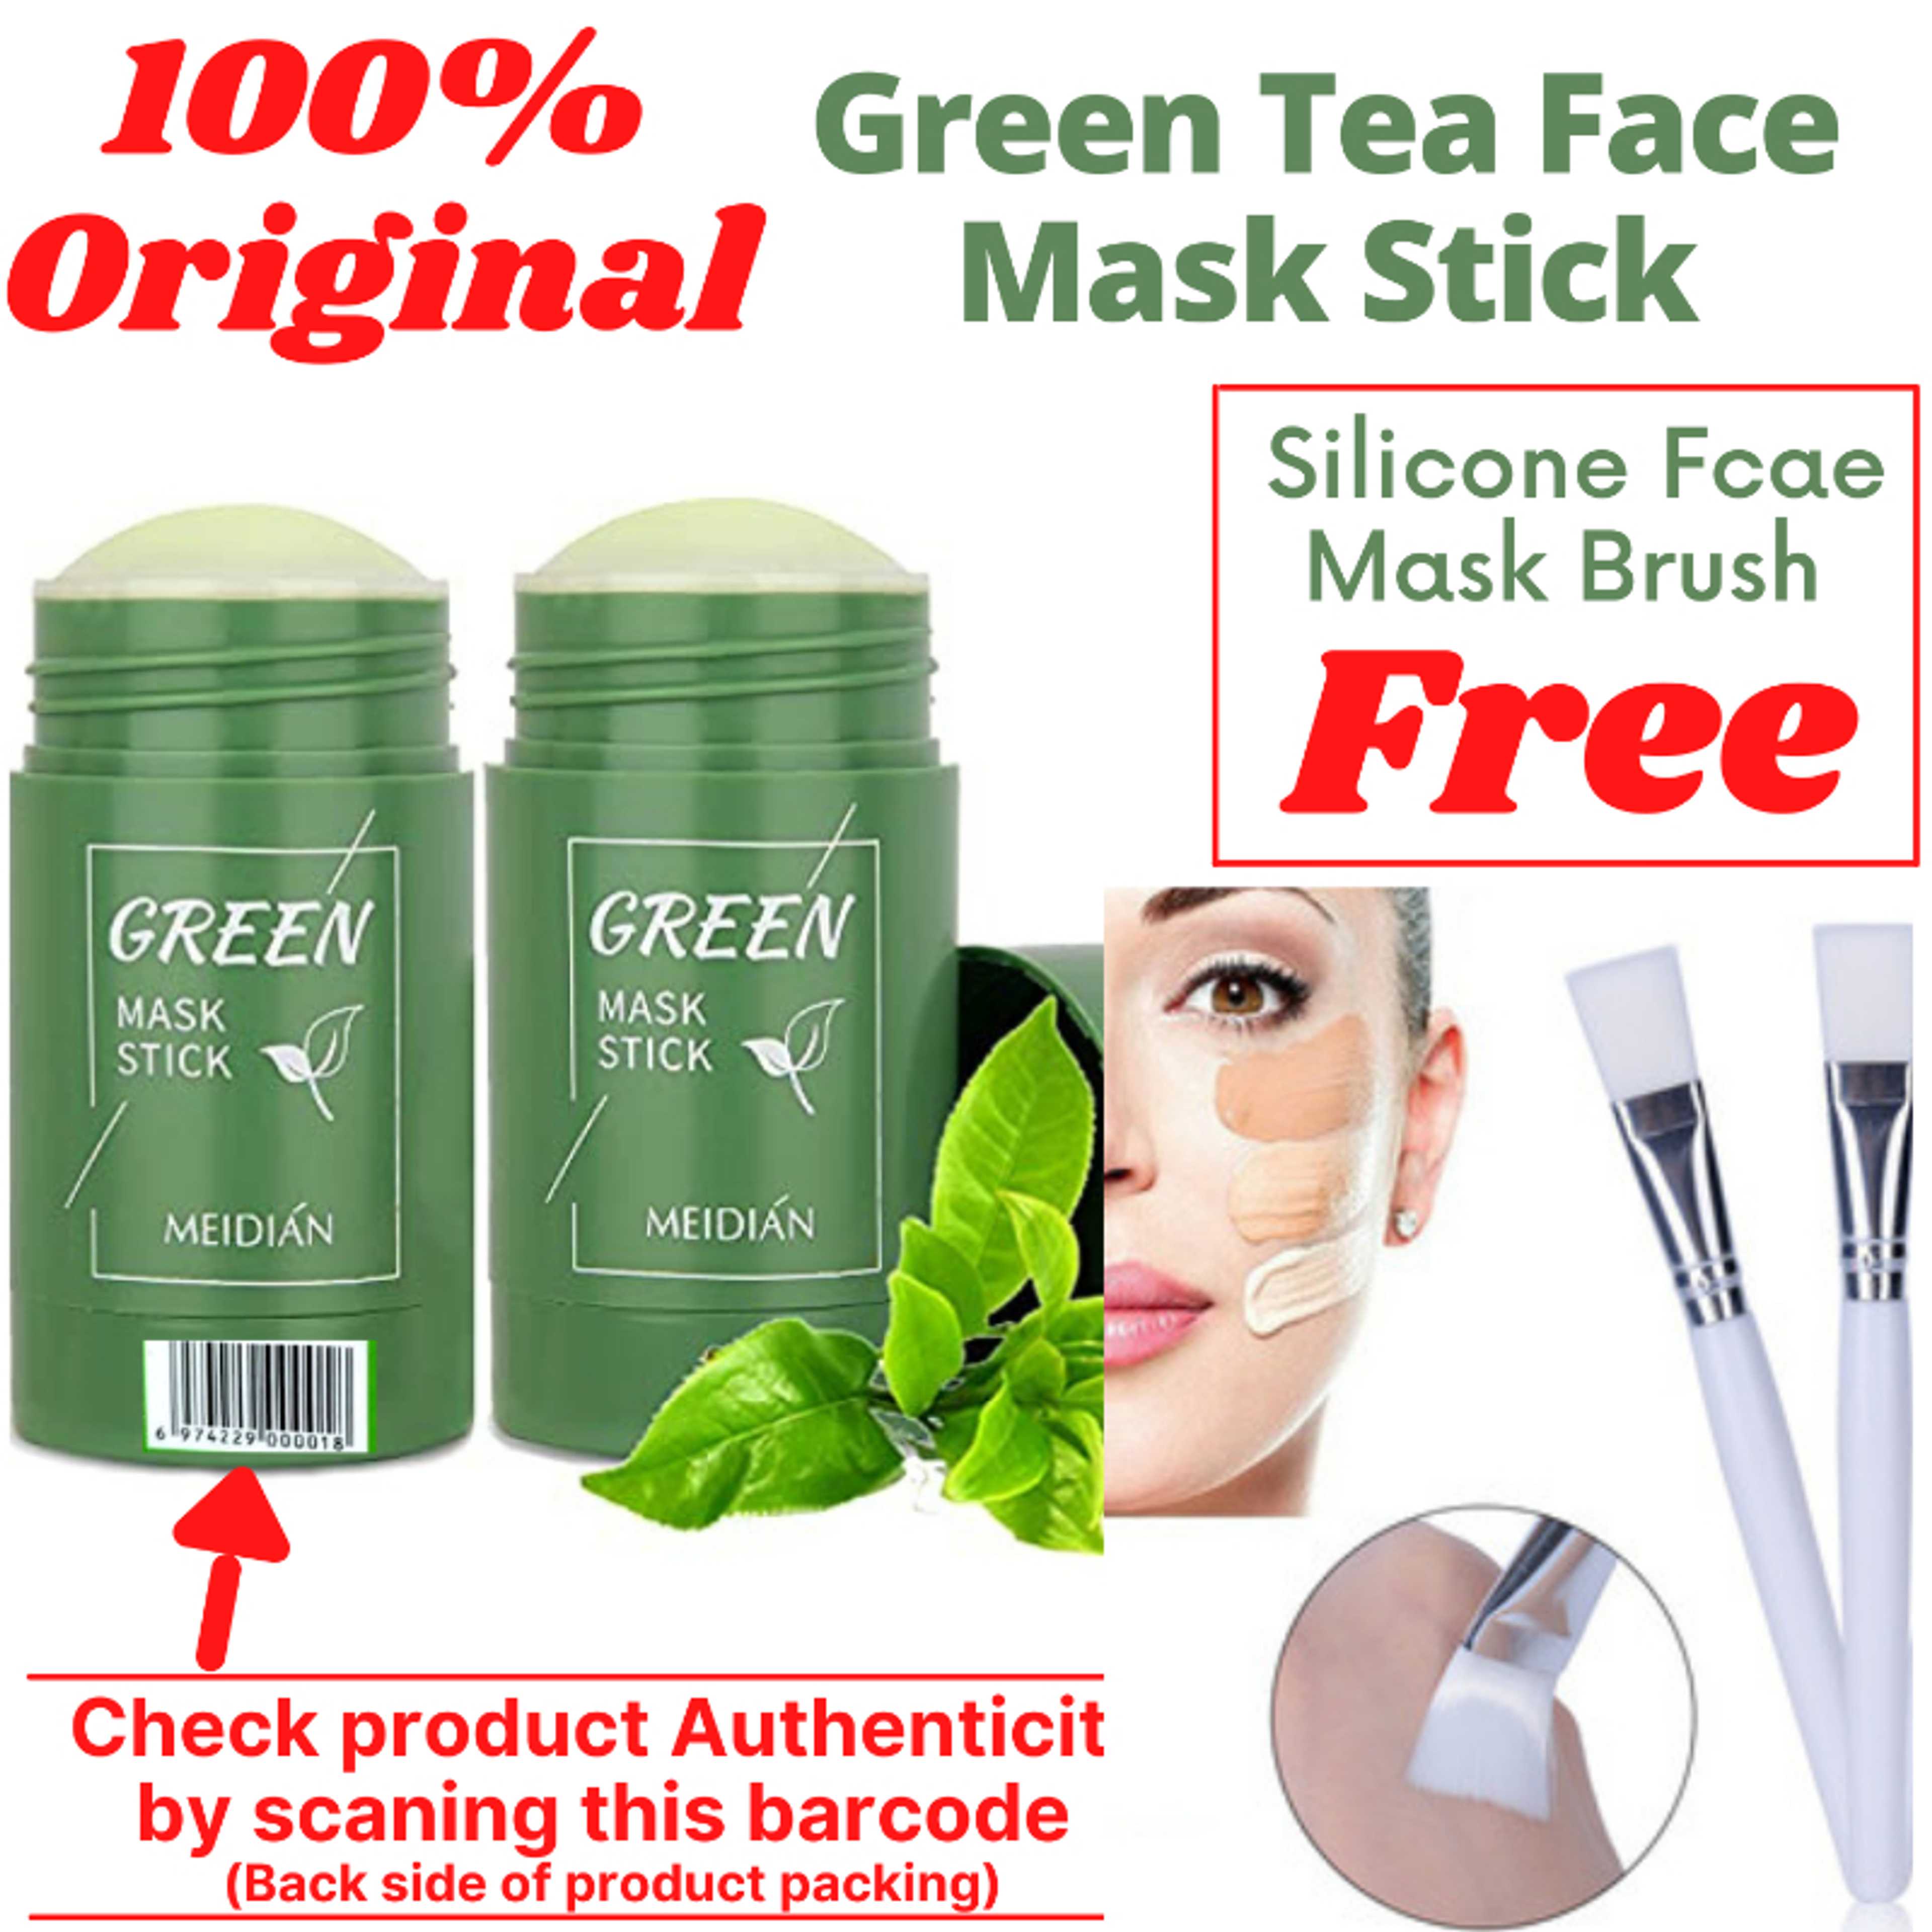 Green Tea Cleansing Mask Purifying Clay Stick Mask Oil Control Skin Care Anti-Acne Blackhead Mud Mask